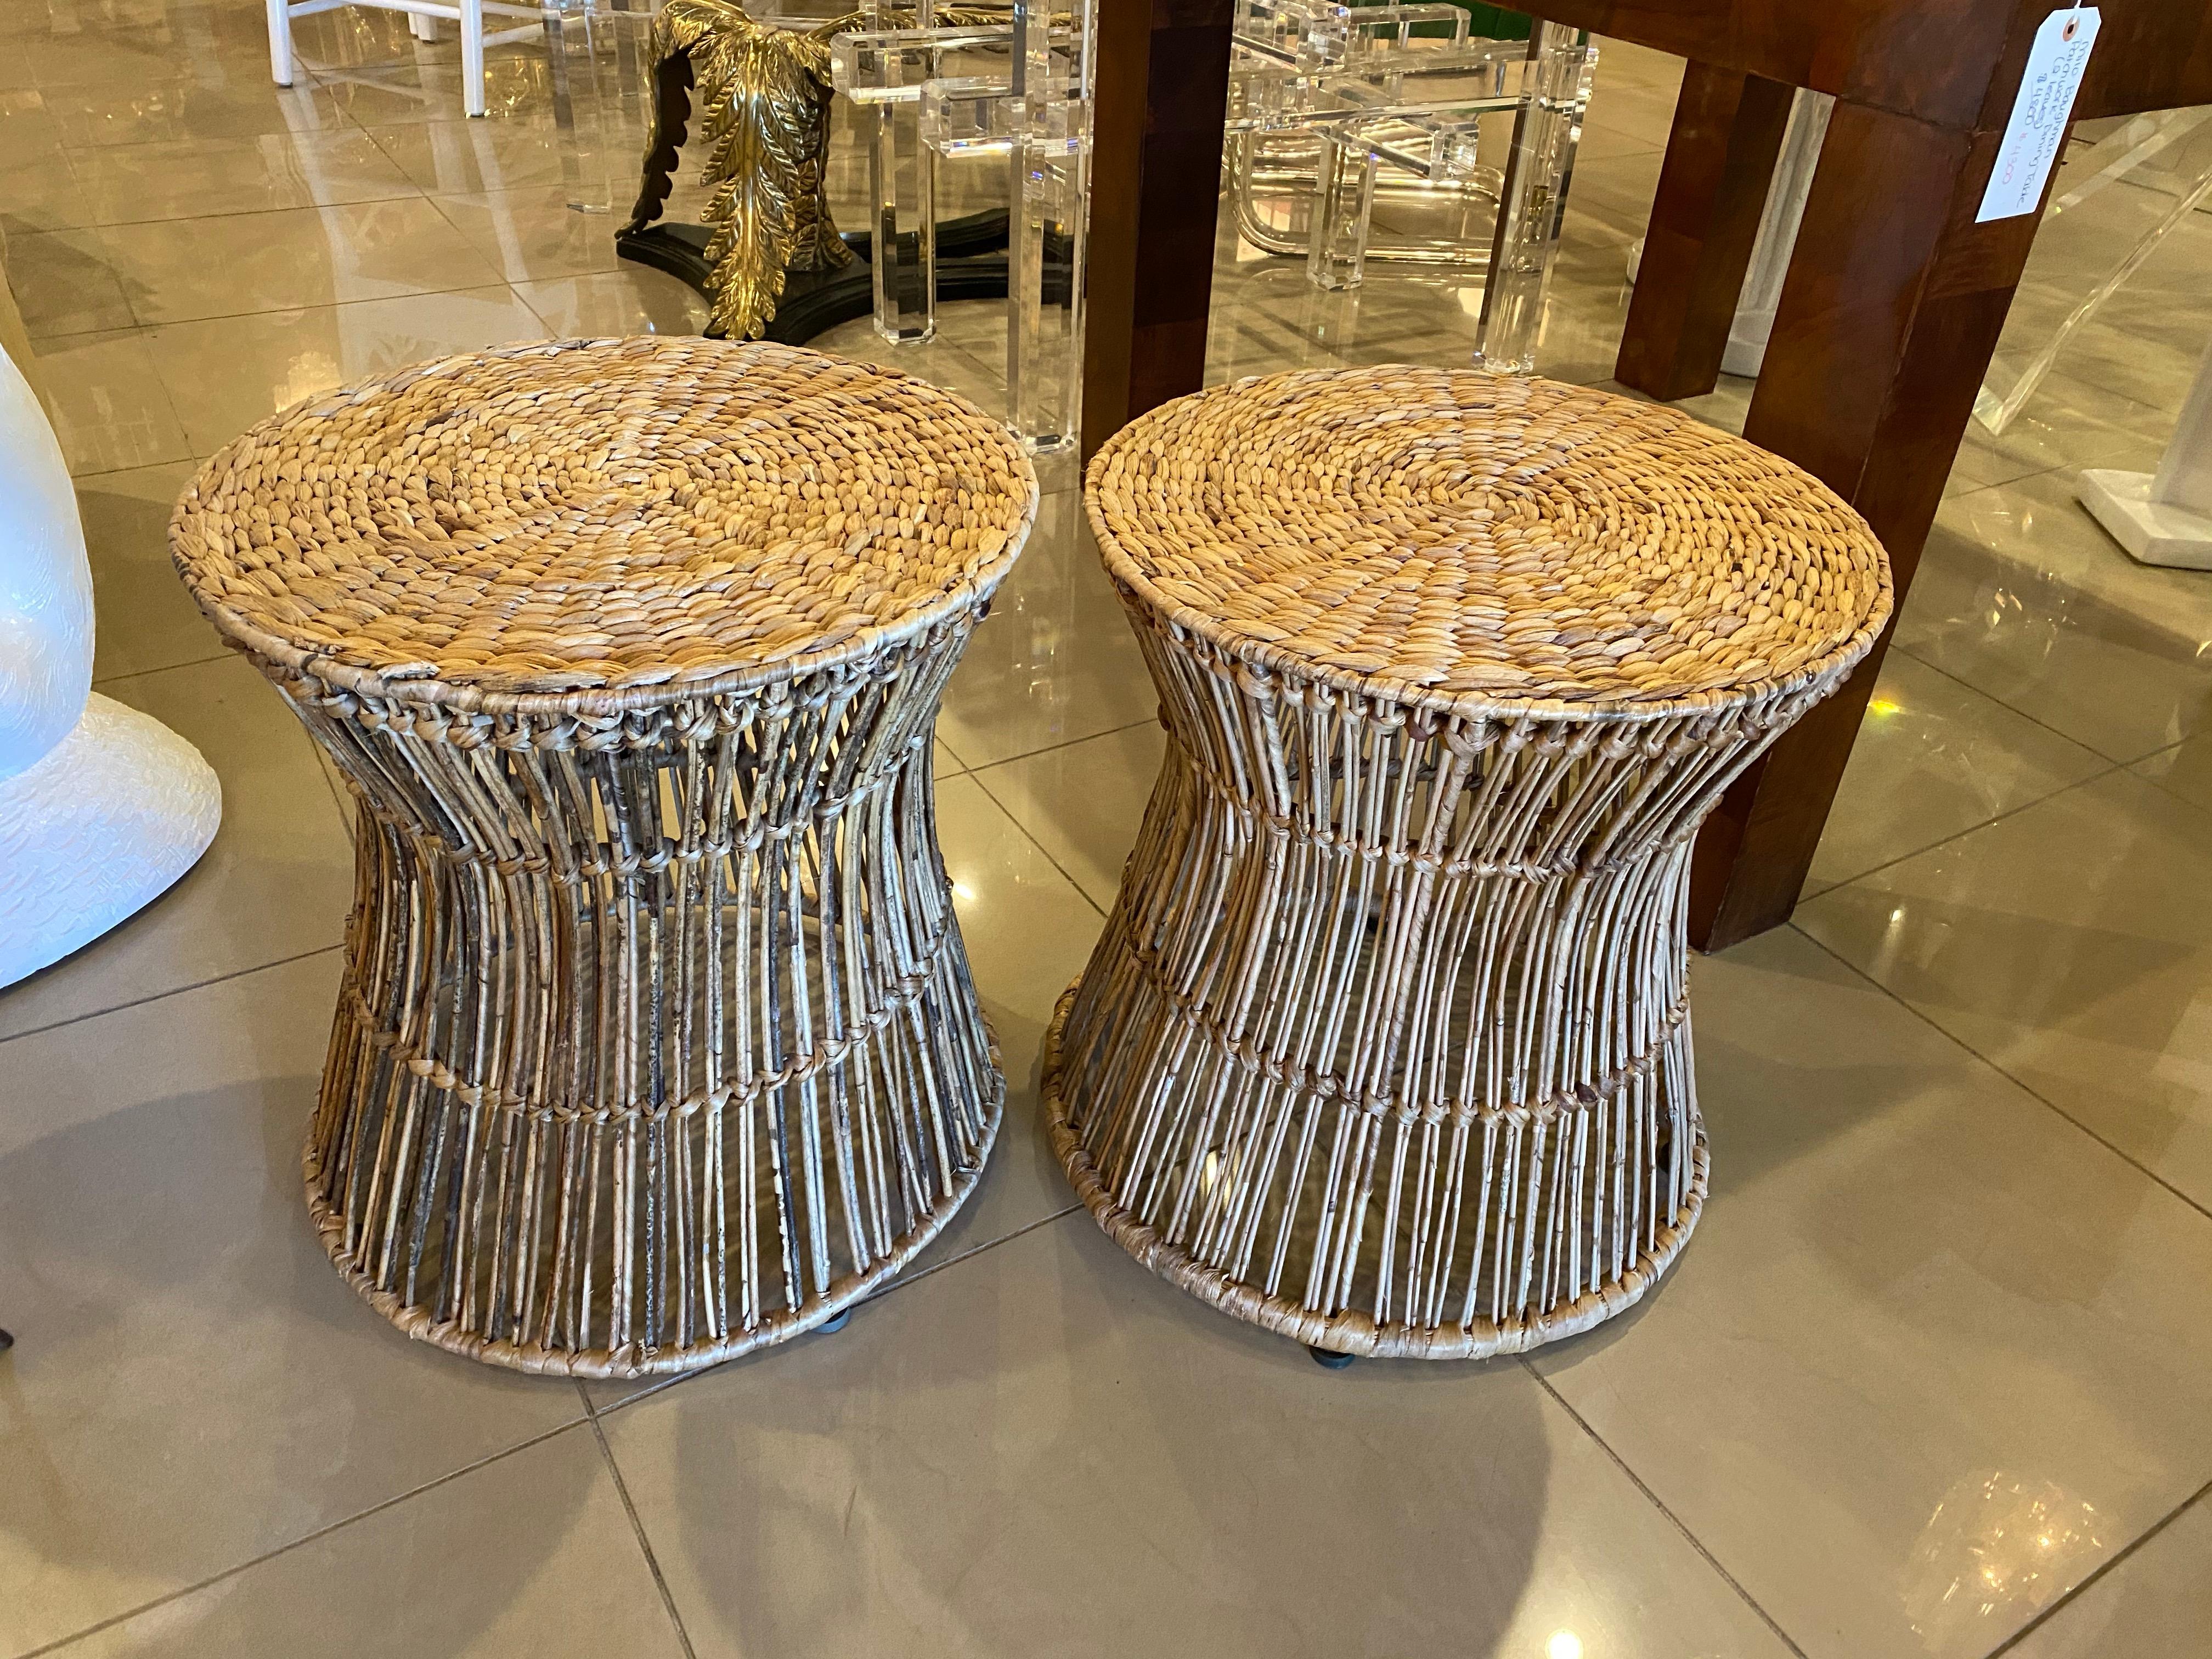 Lovely pair of vintage rattan and seagrass stools, ottomans or benches. No broken or damages pieces of rattan or seagrass.